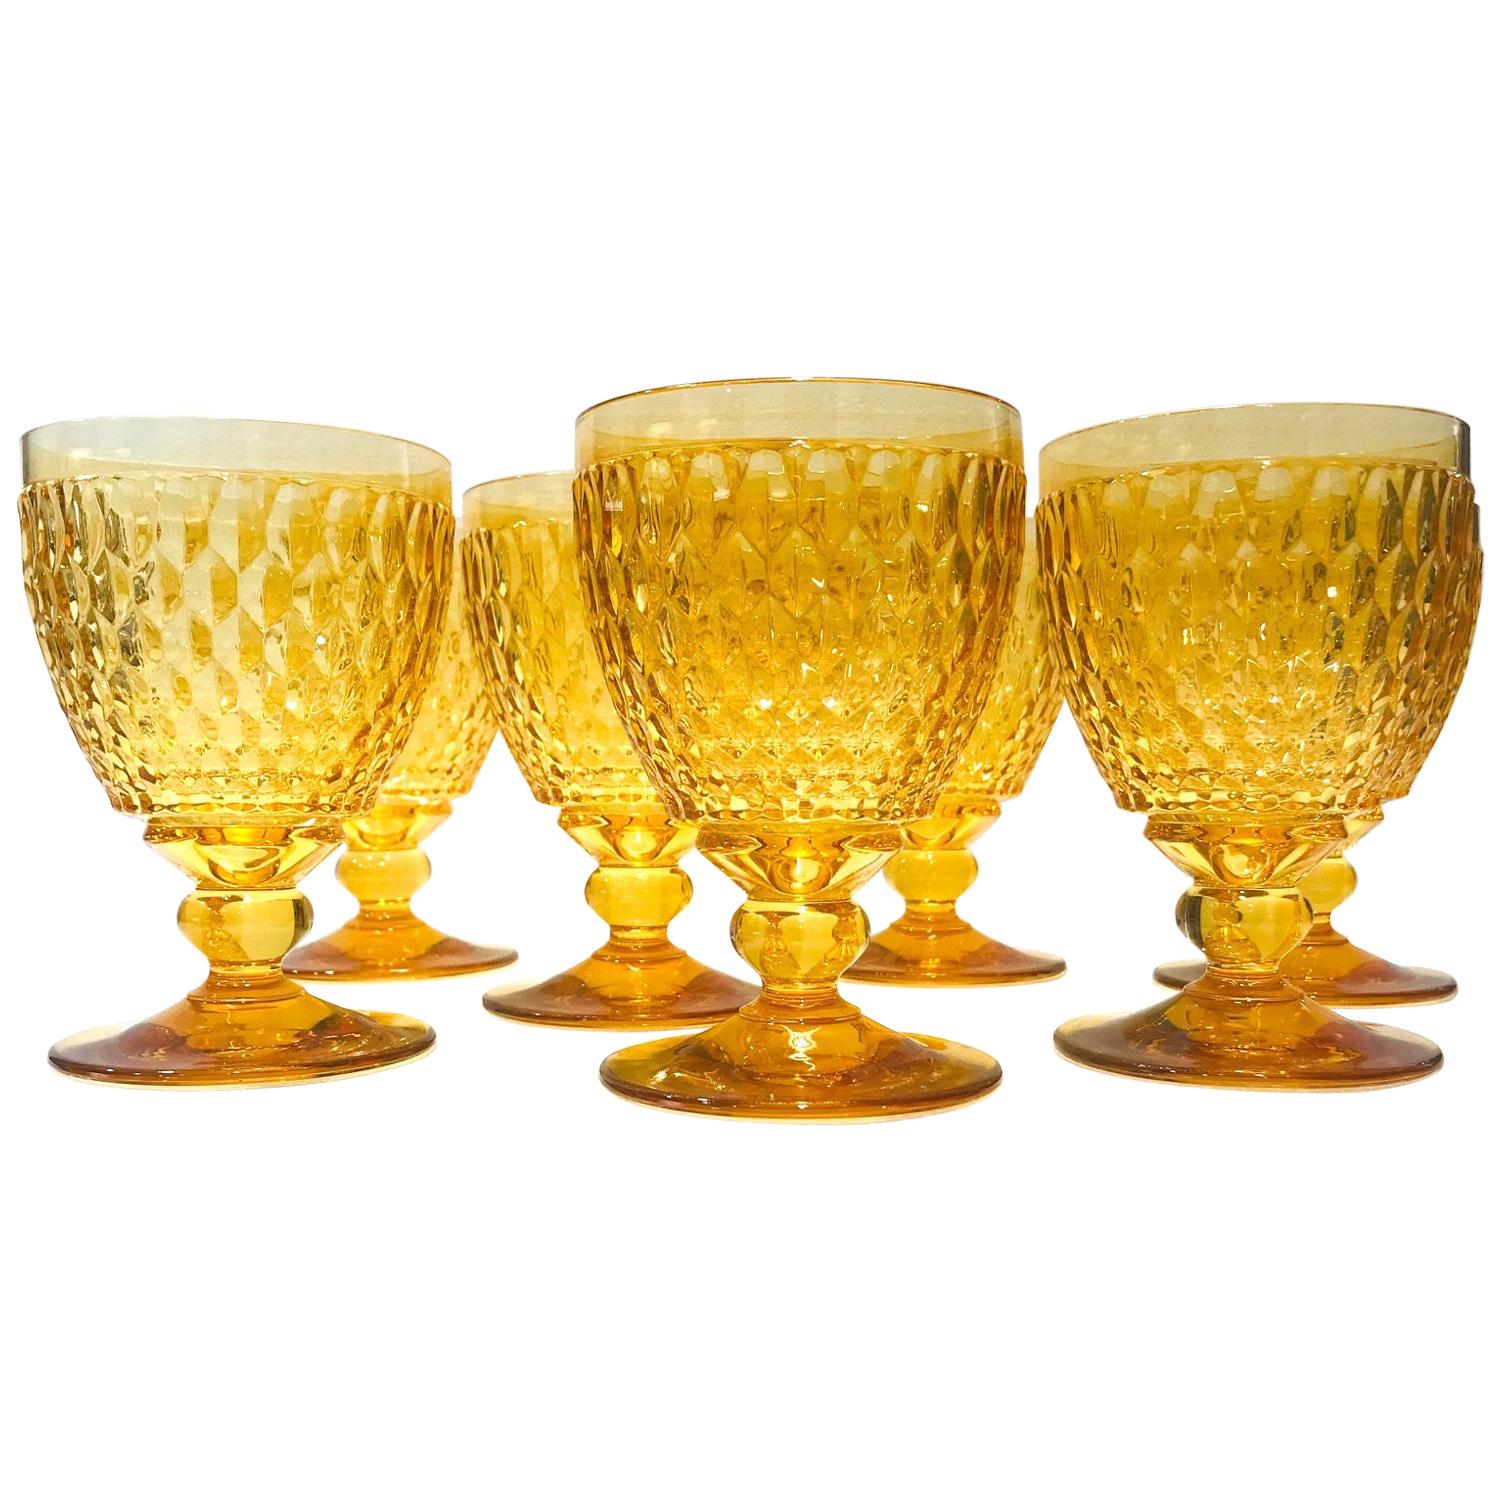 Set of eight German crystal goblets from Villeroy & Boch. Stemware glasses feature hobnail crystal with a classic diamond pattern. The glasses are designed with deliberate short stems with a blown glass ball accent. Available in gorgeous amber or